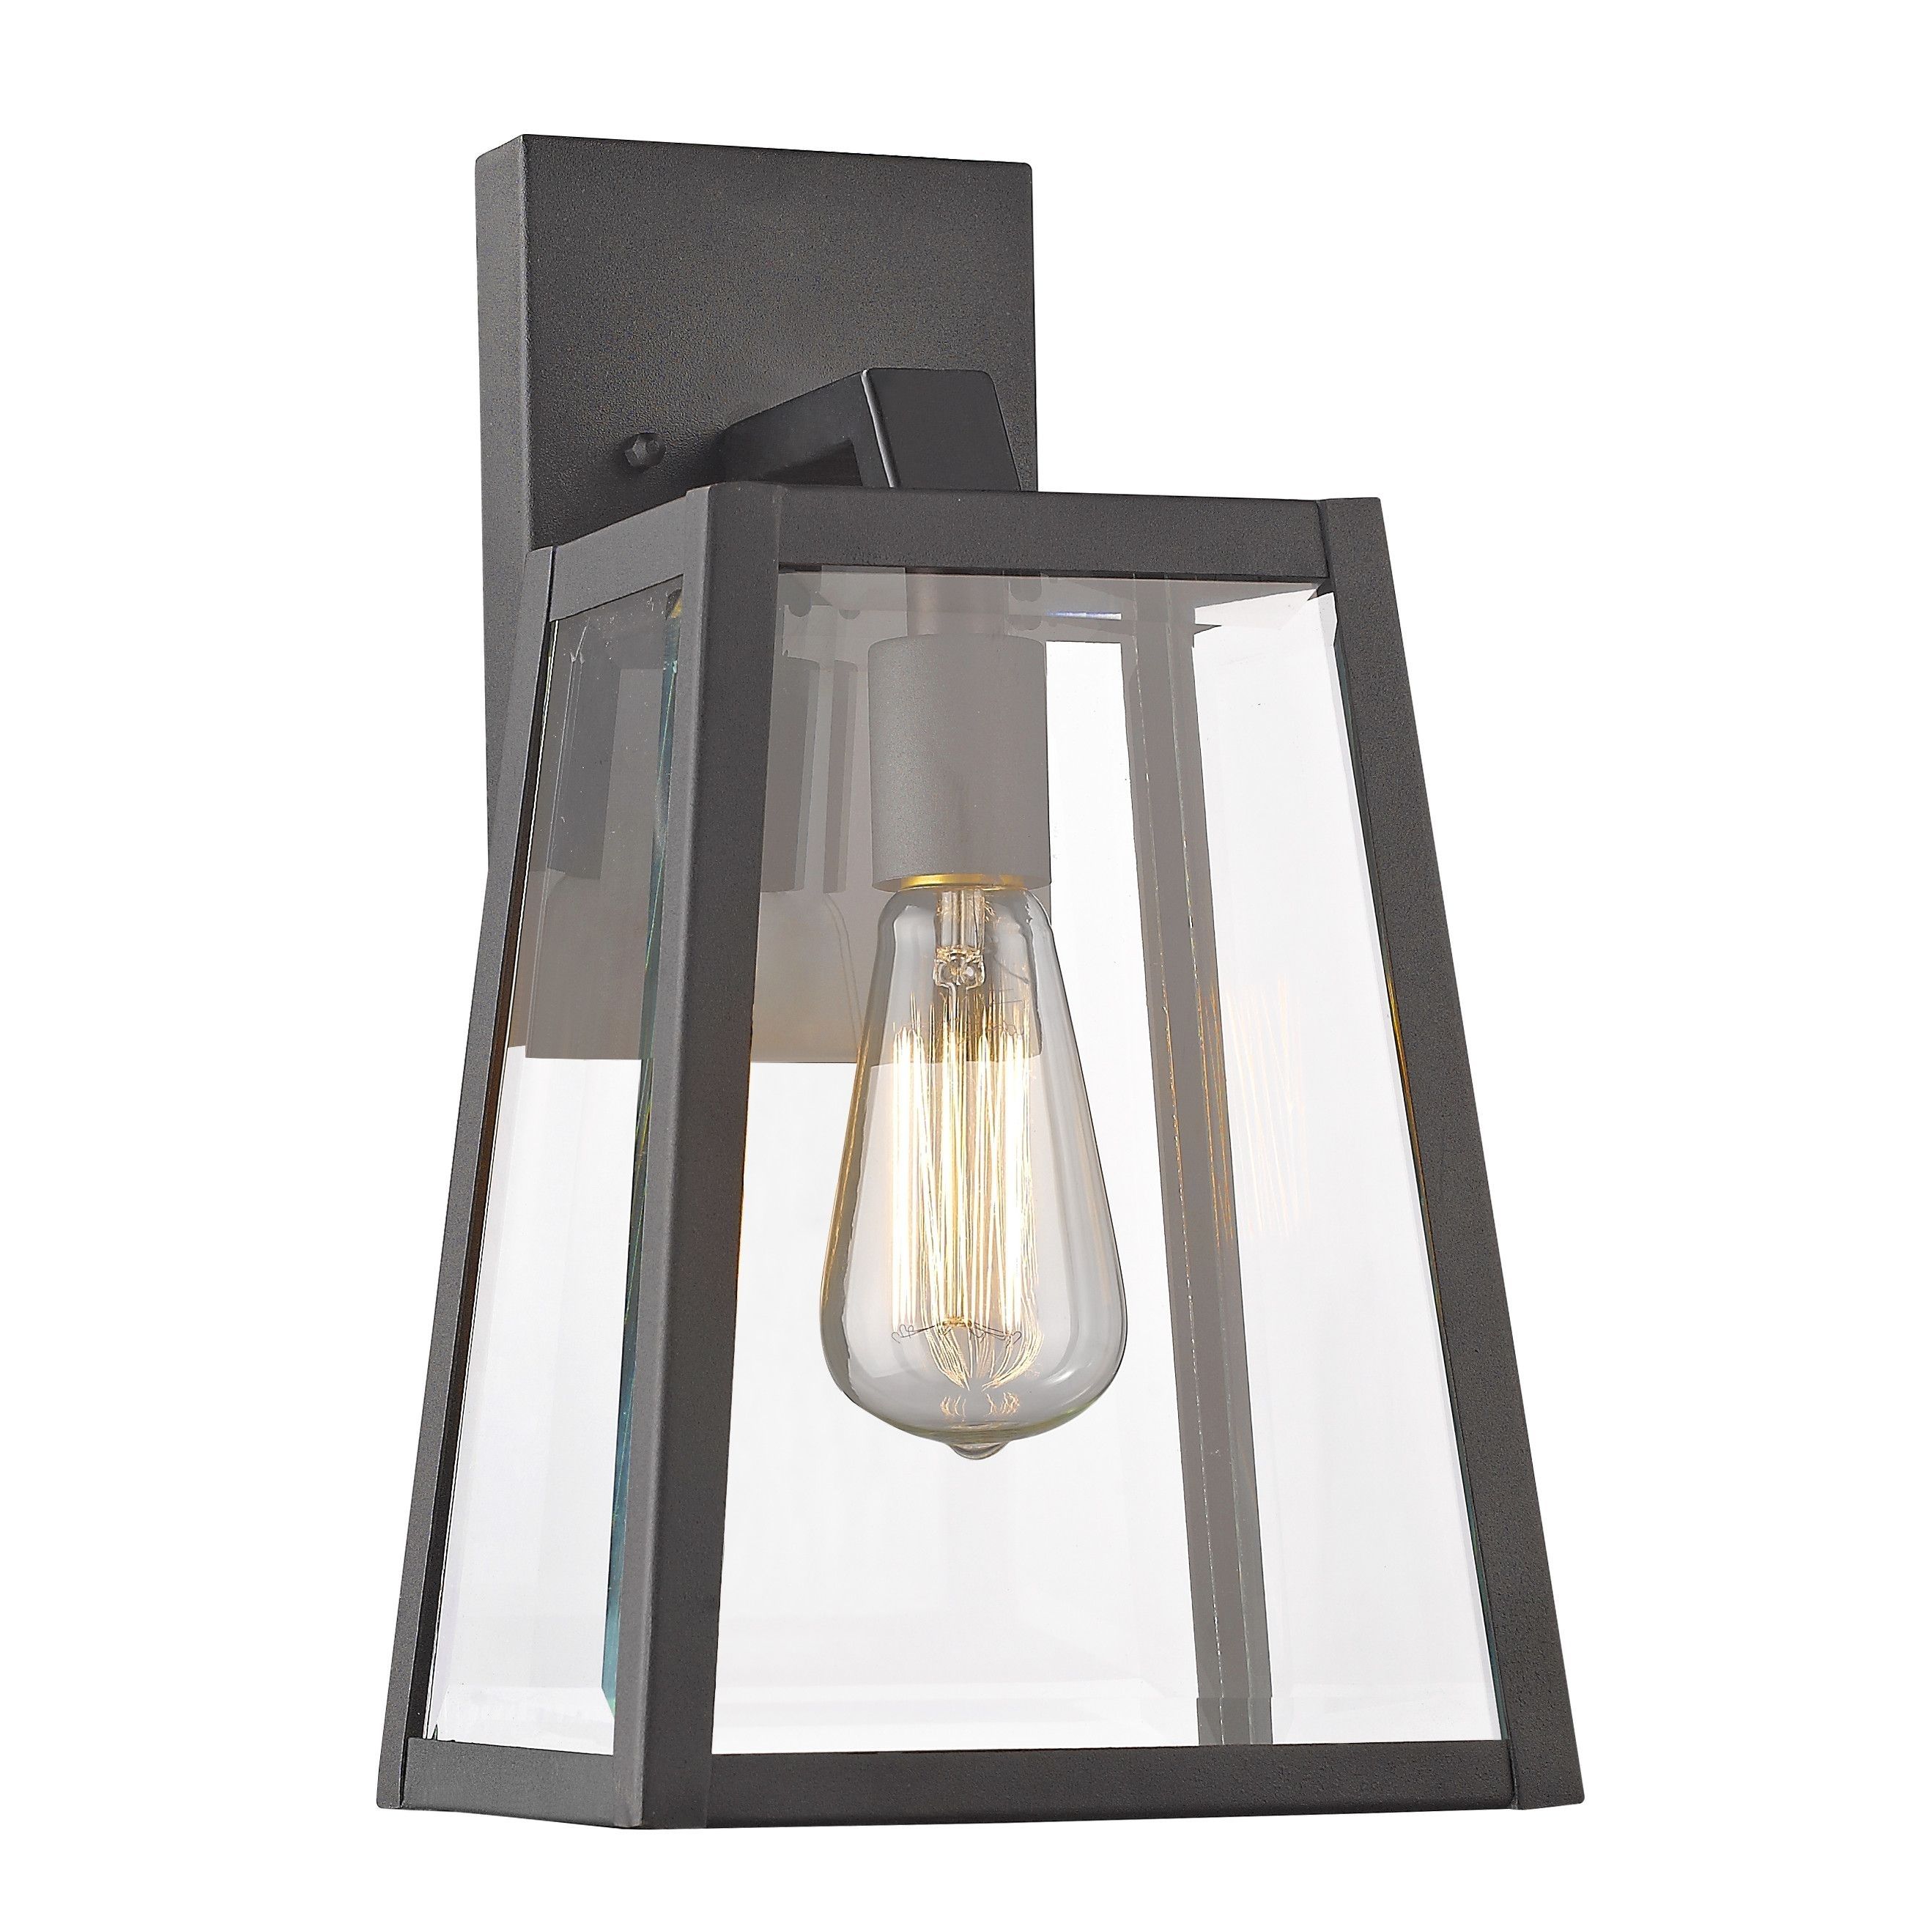 Chloe Lighting 1 Light Outdoor Wall Lantern | Ravensworth Intended For Outdoor Lighting And Light Fixtures At Wayfair (Photo 1 of 15)